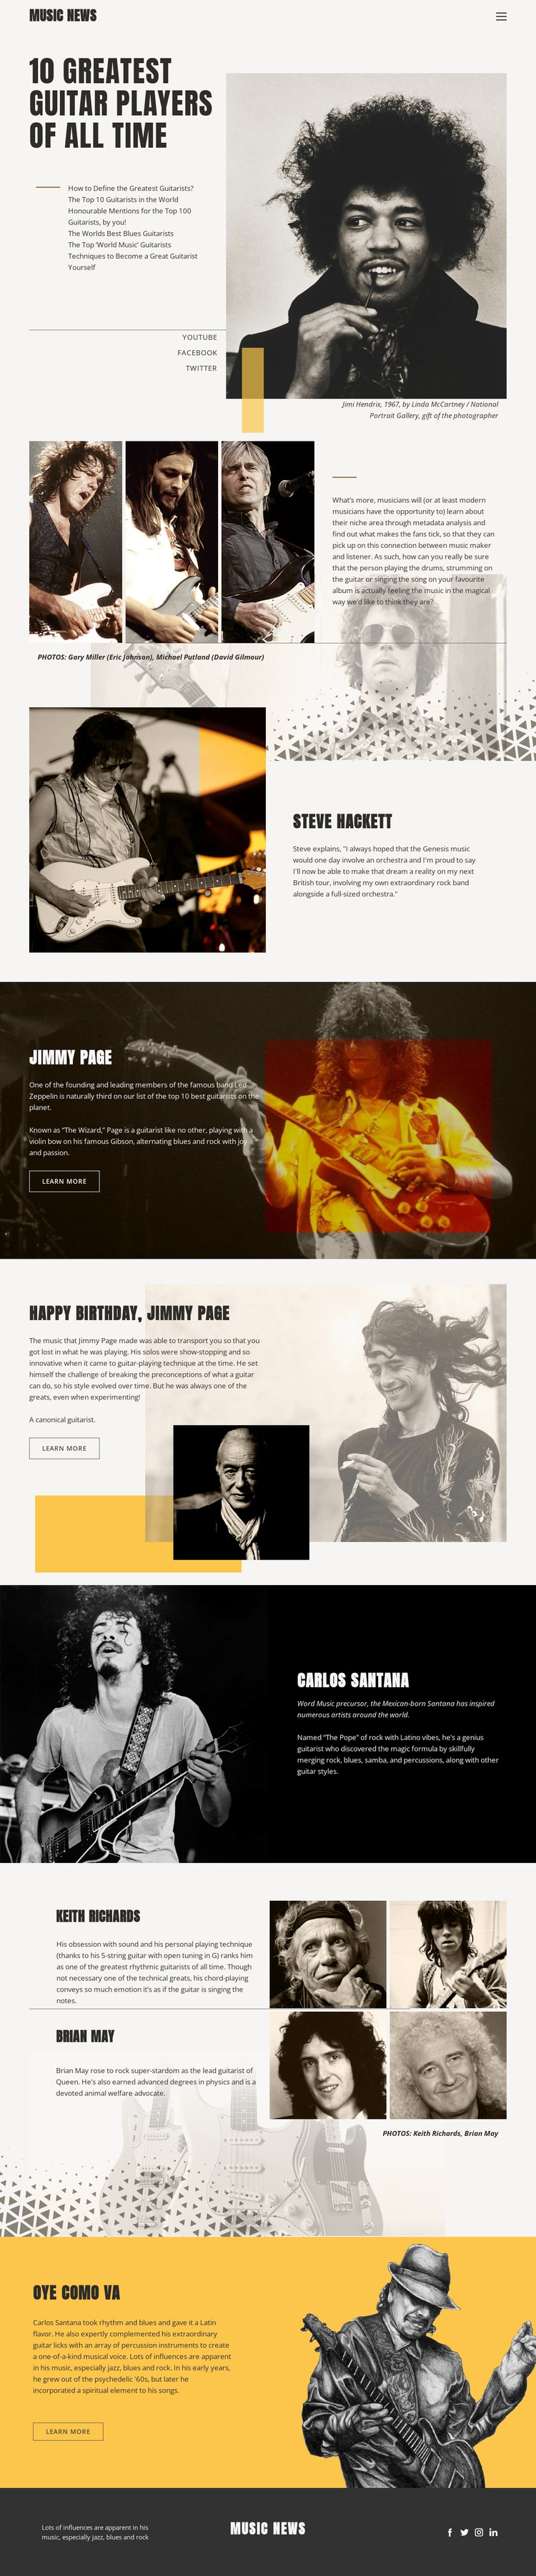 The Top Guitar Players Template